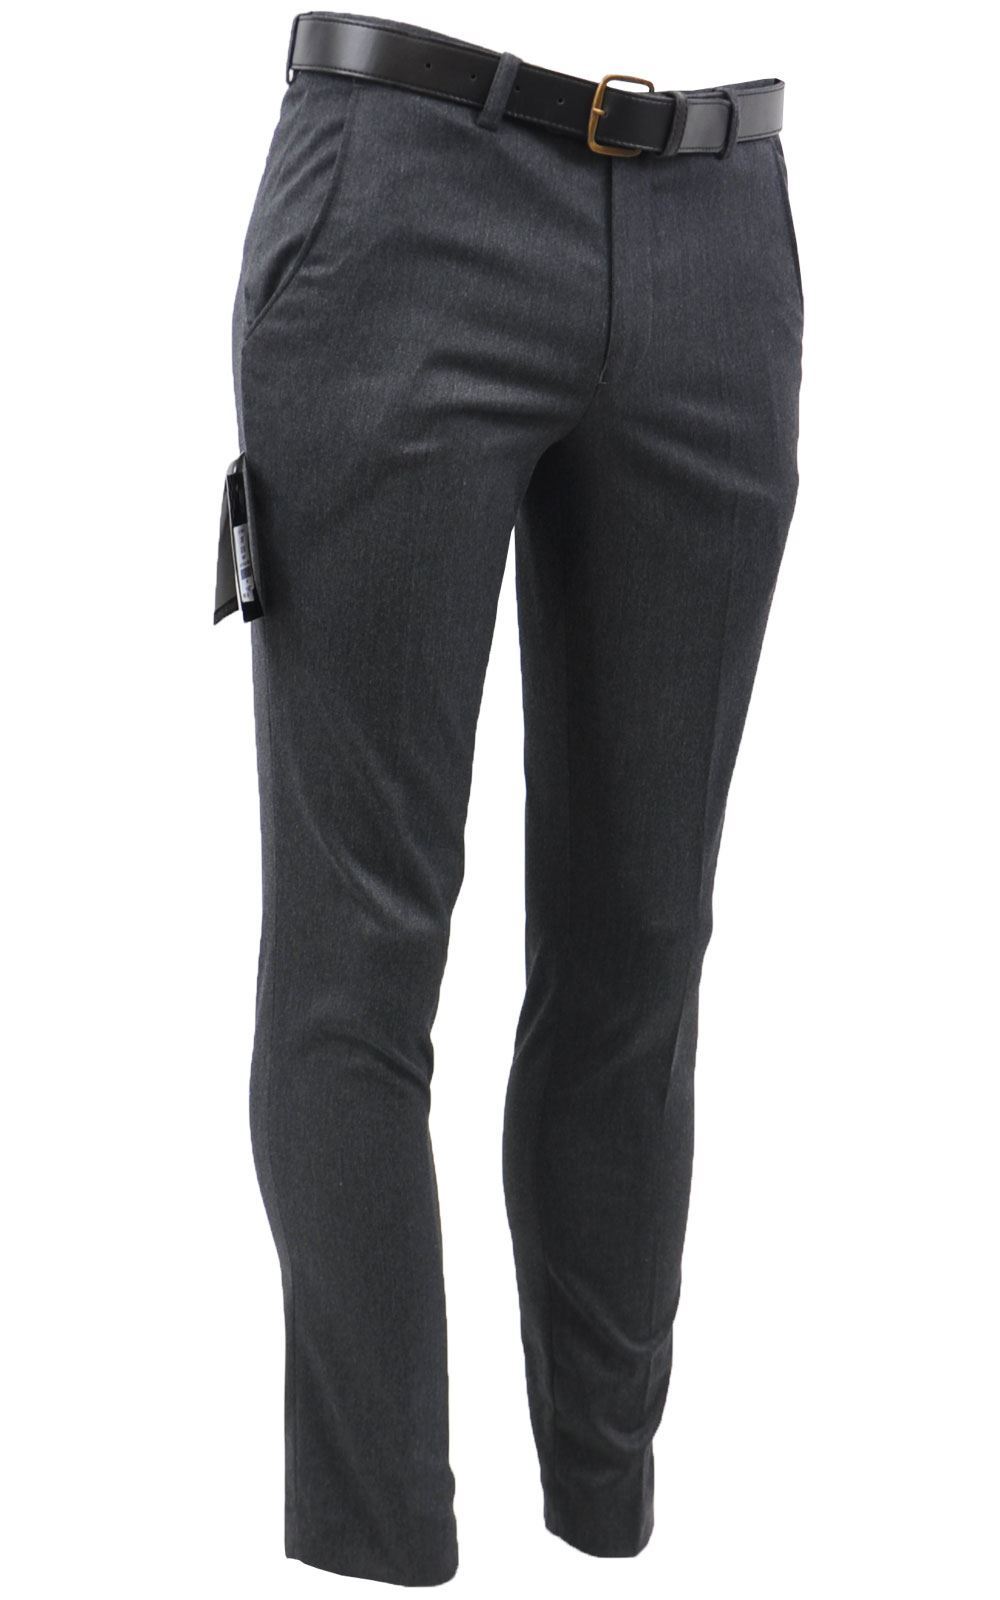 Blackberrys Black Super Skinny Trousers  34  UT SEAM BLACK in Hyderabad  at best price by Grafs Life Style  Justdial